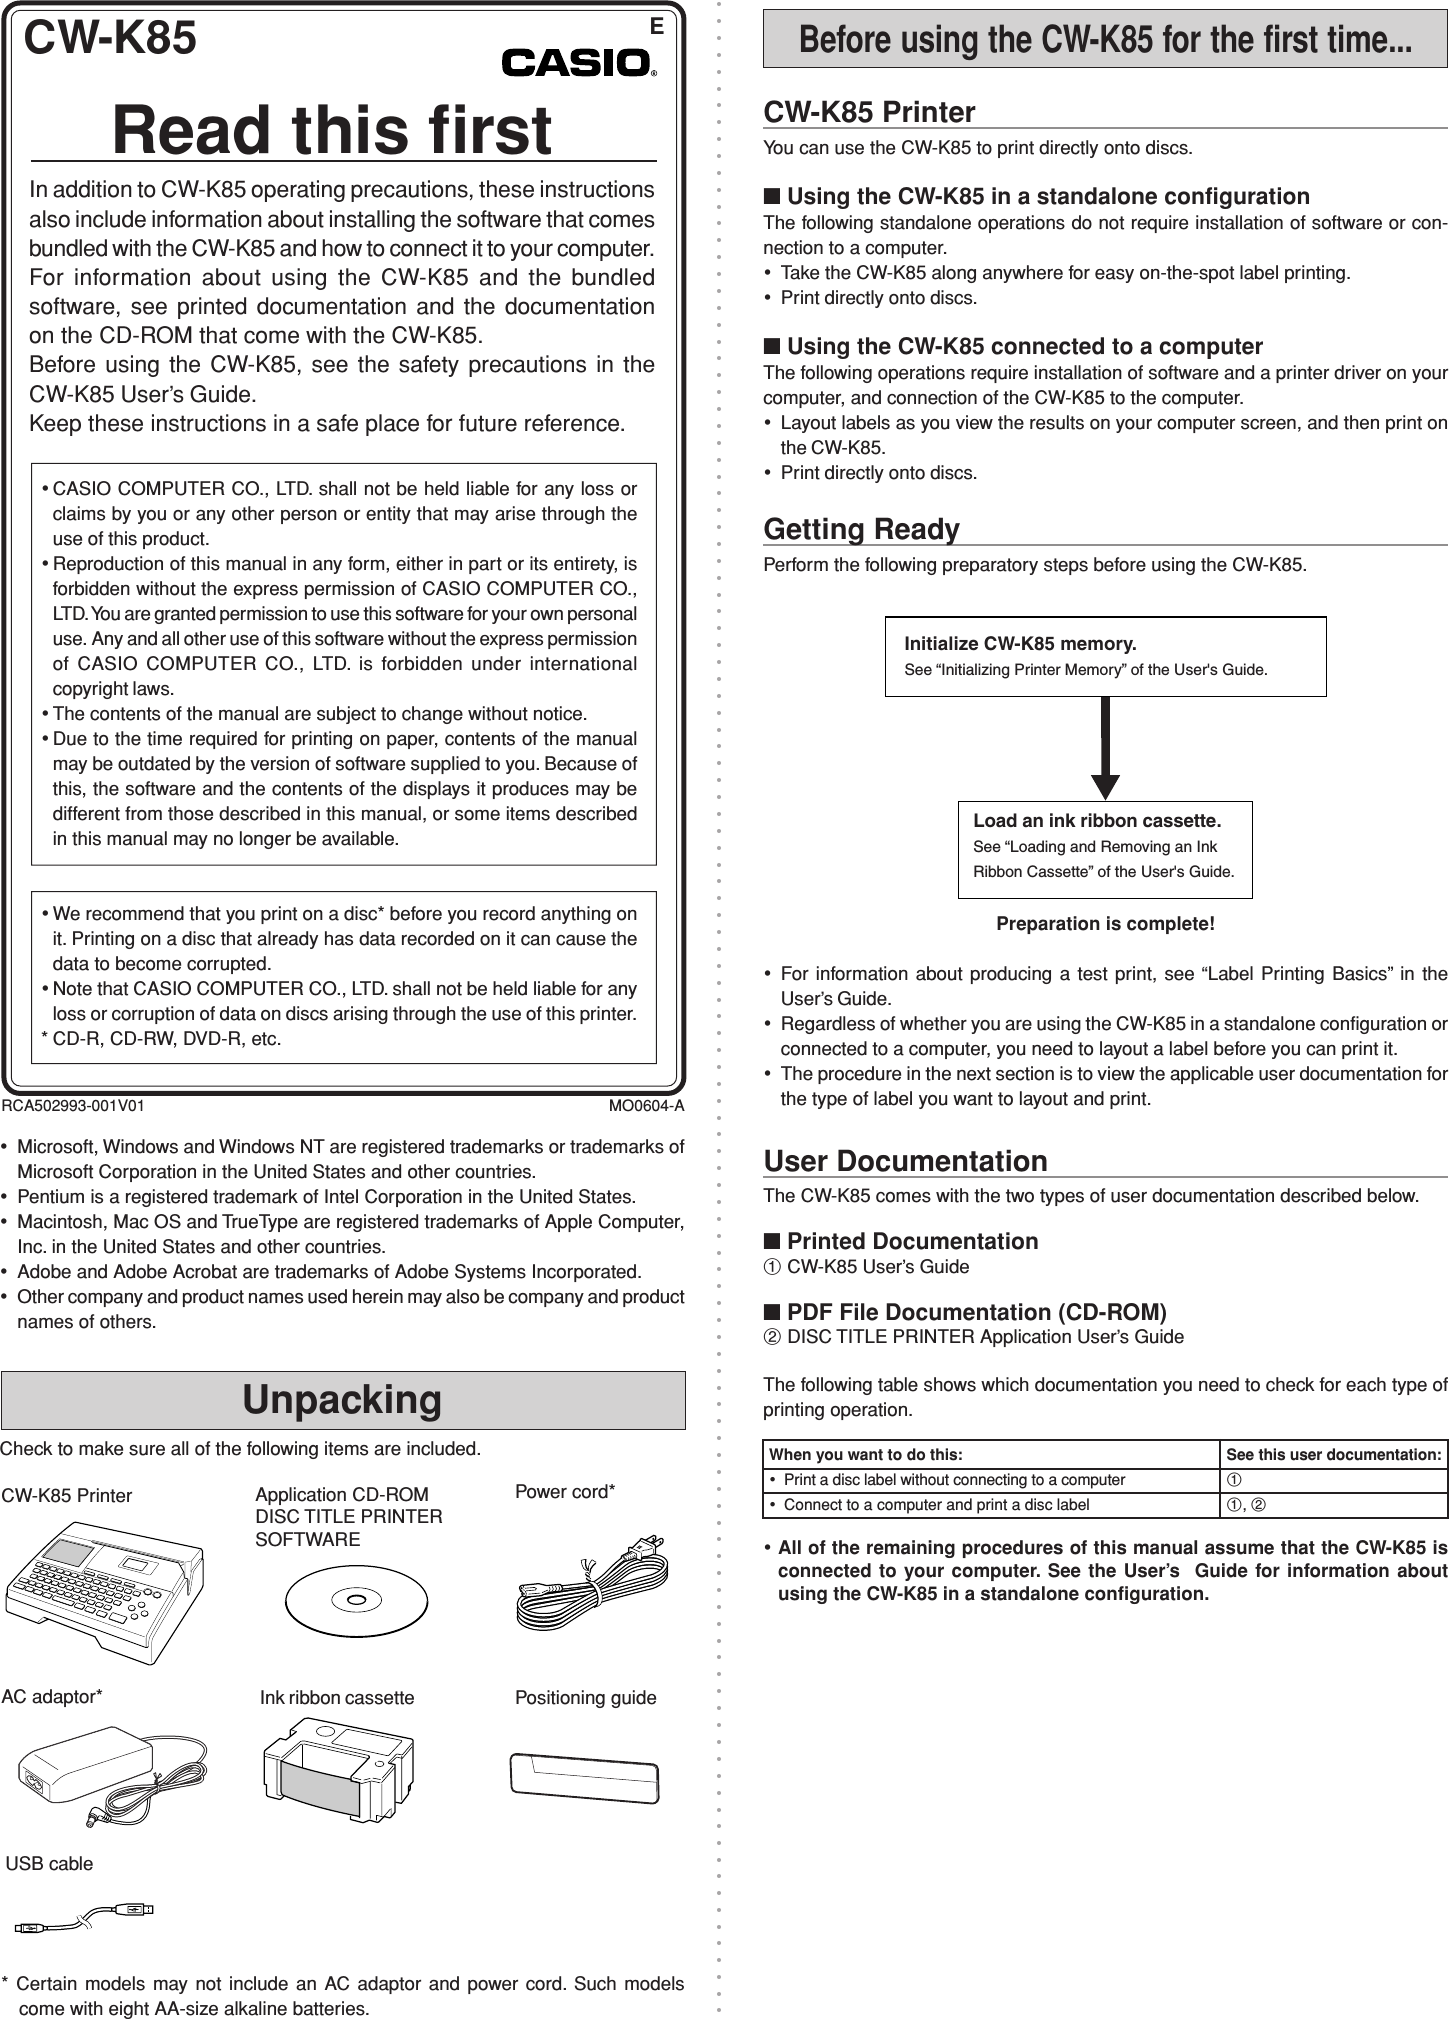 Page 1 of 4 - Casio Cw-K85-Rtf-E CW-K85_Read This First